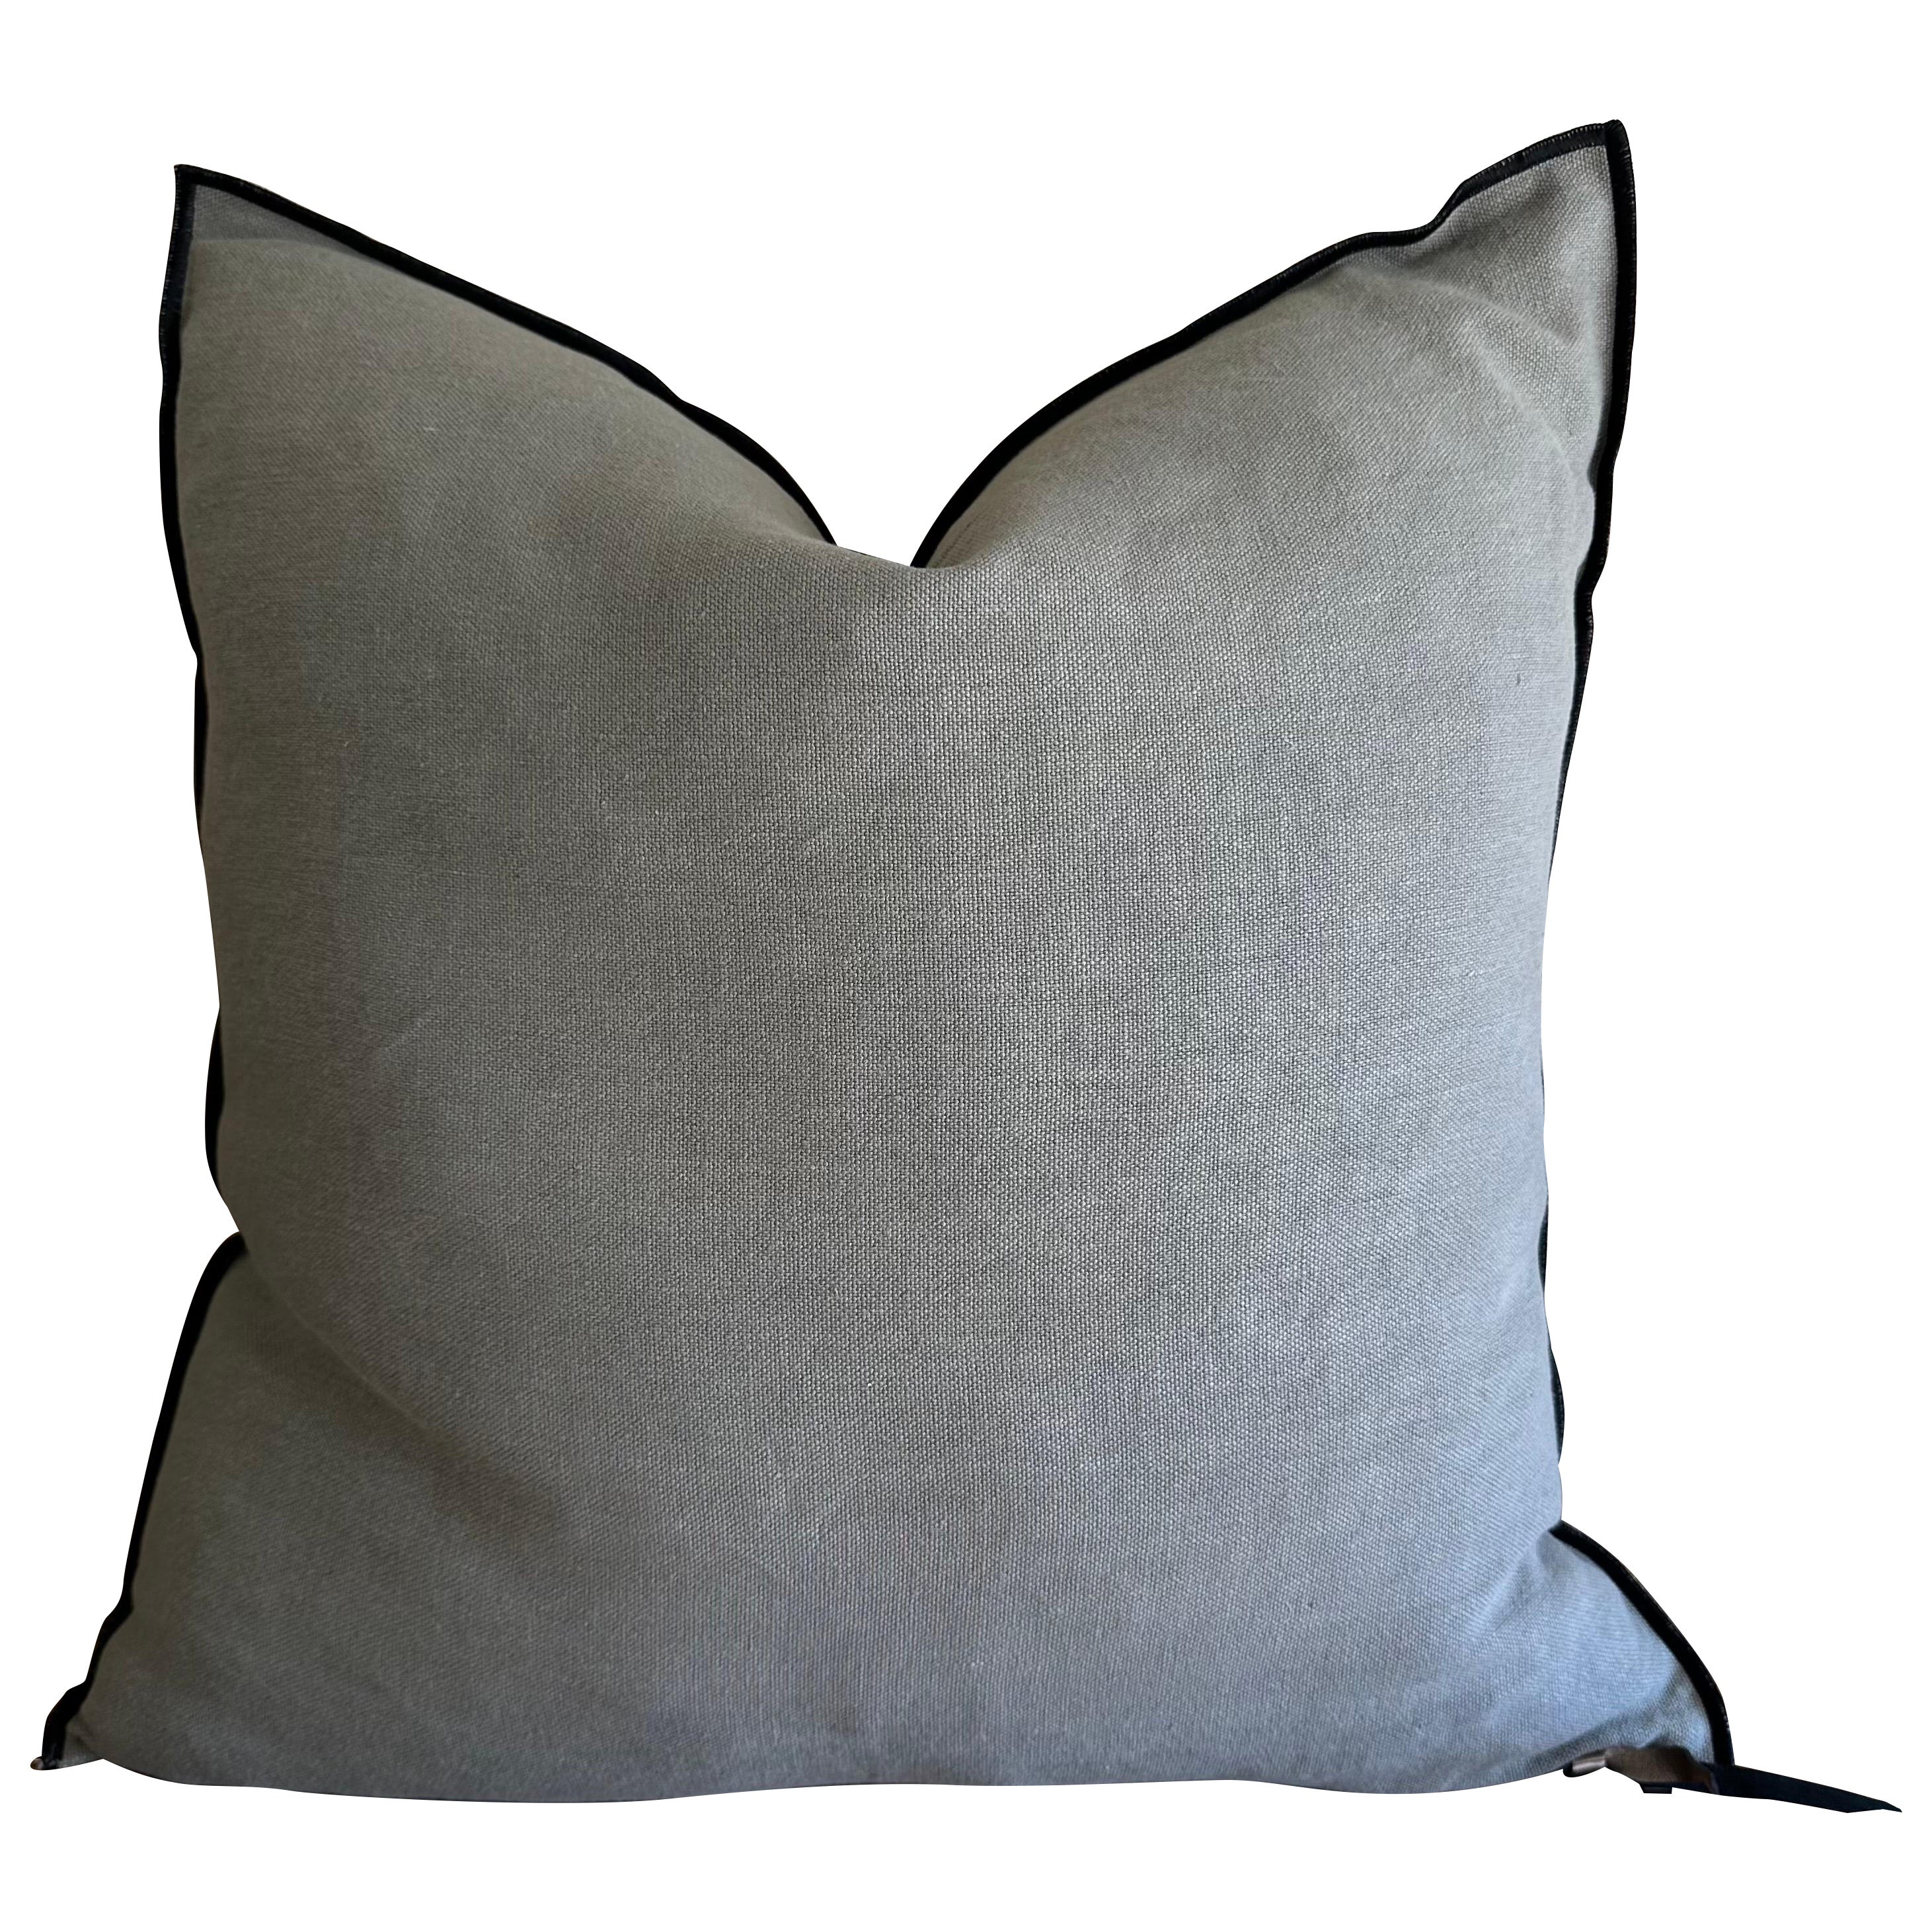 French, Stone Washed Linen Accent Pillow in Camouflage with Down Insert